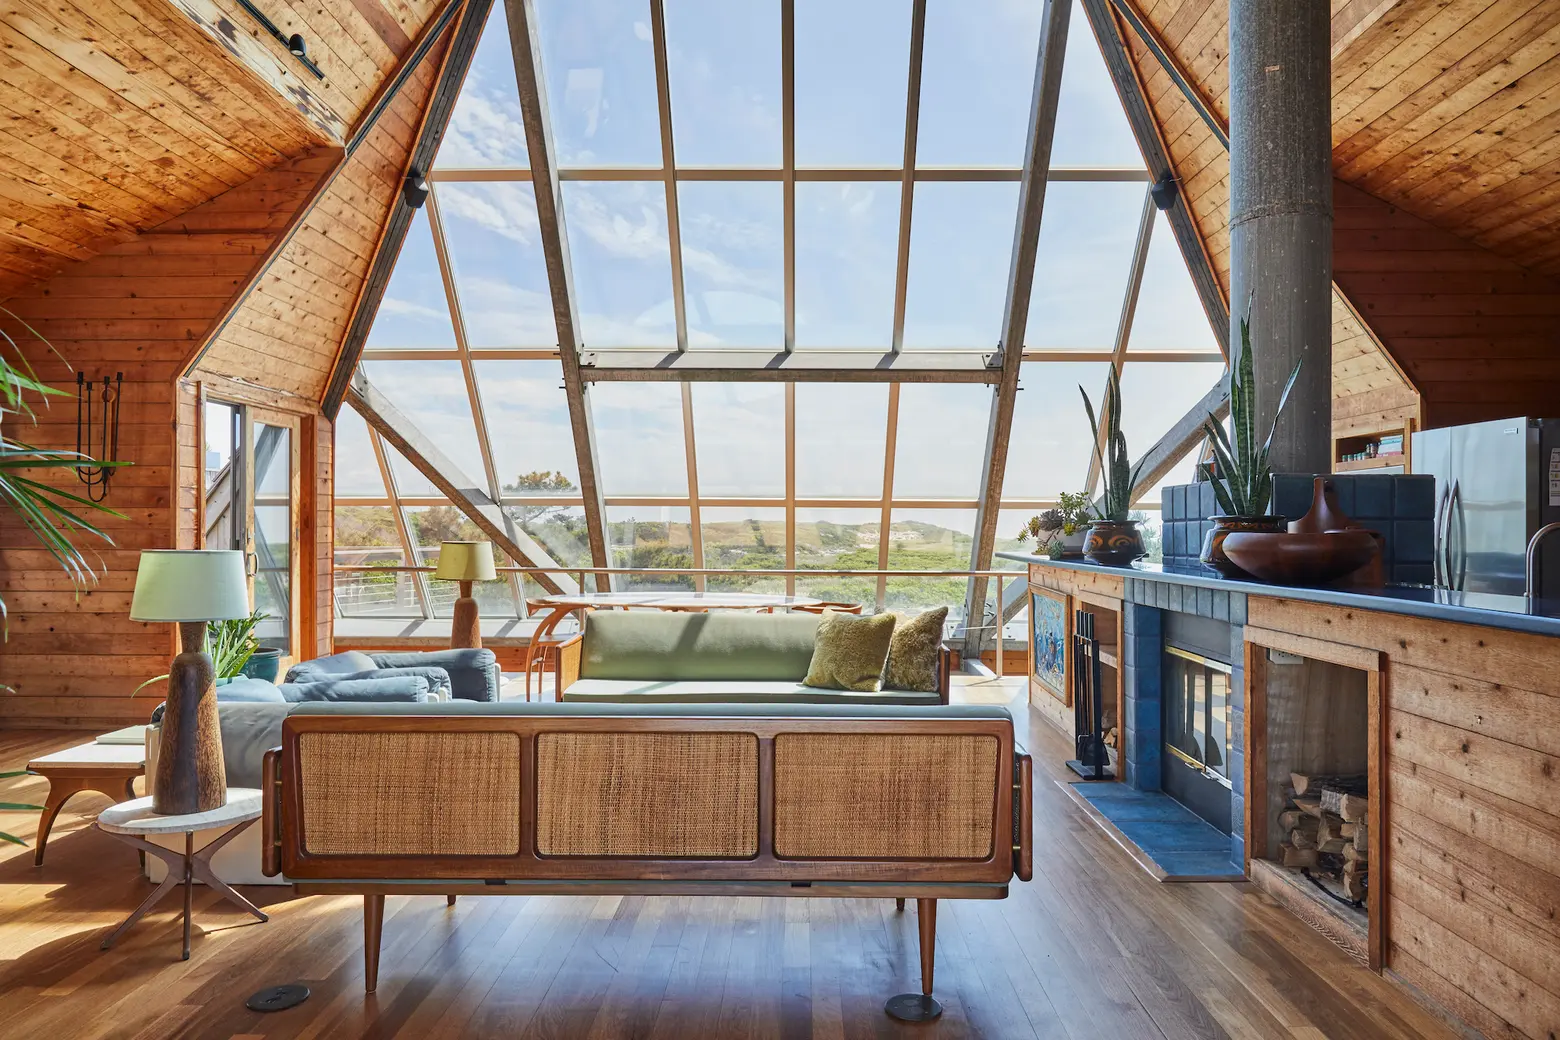 Fire Island modern ‘Pyramid House’ with a creative past asks $6.5M